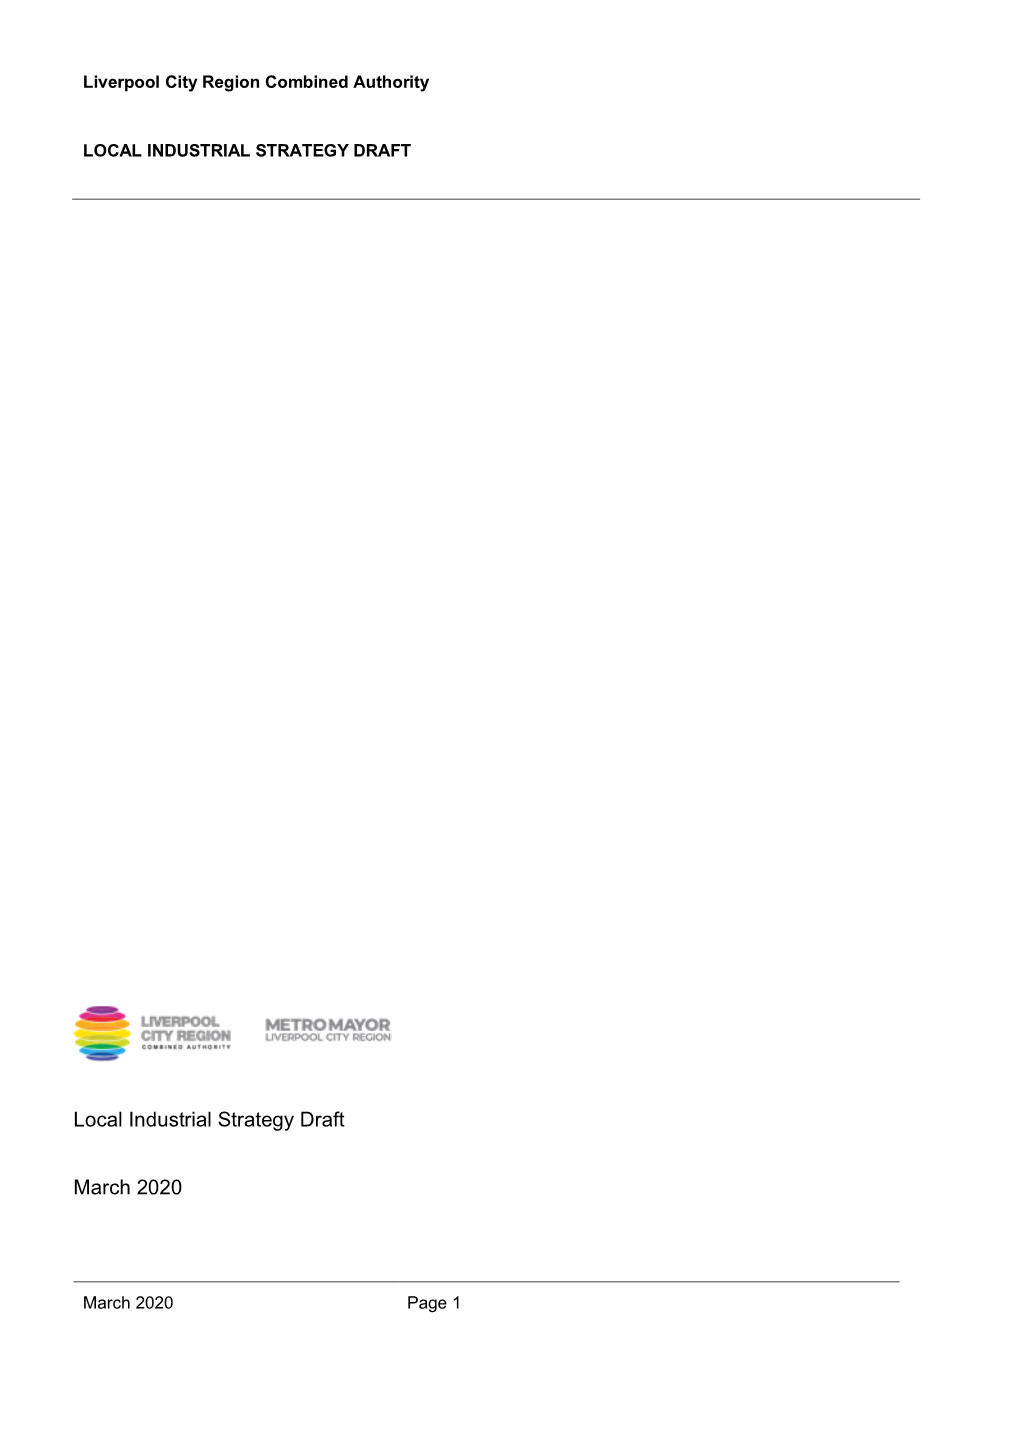 Local Industrial Strategy Draft